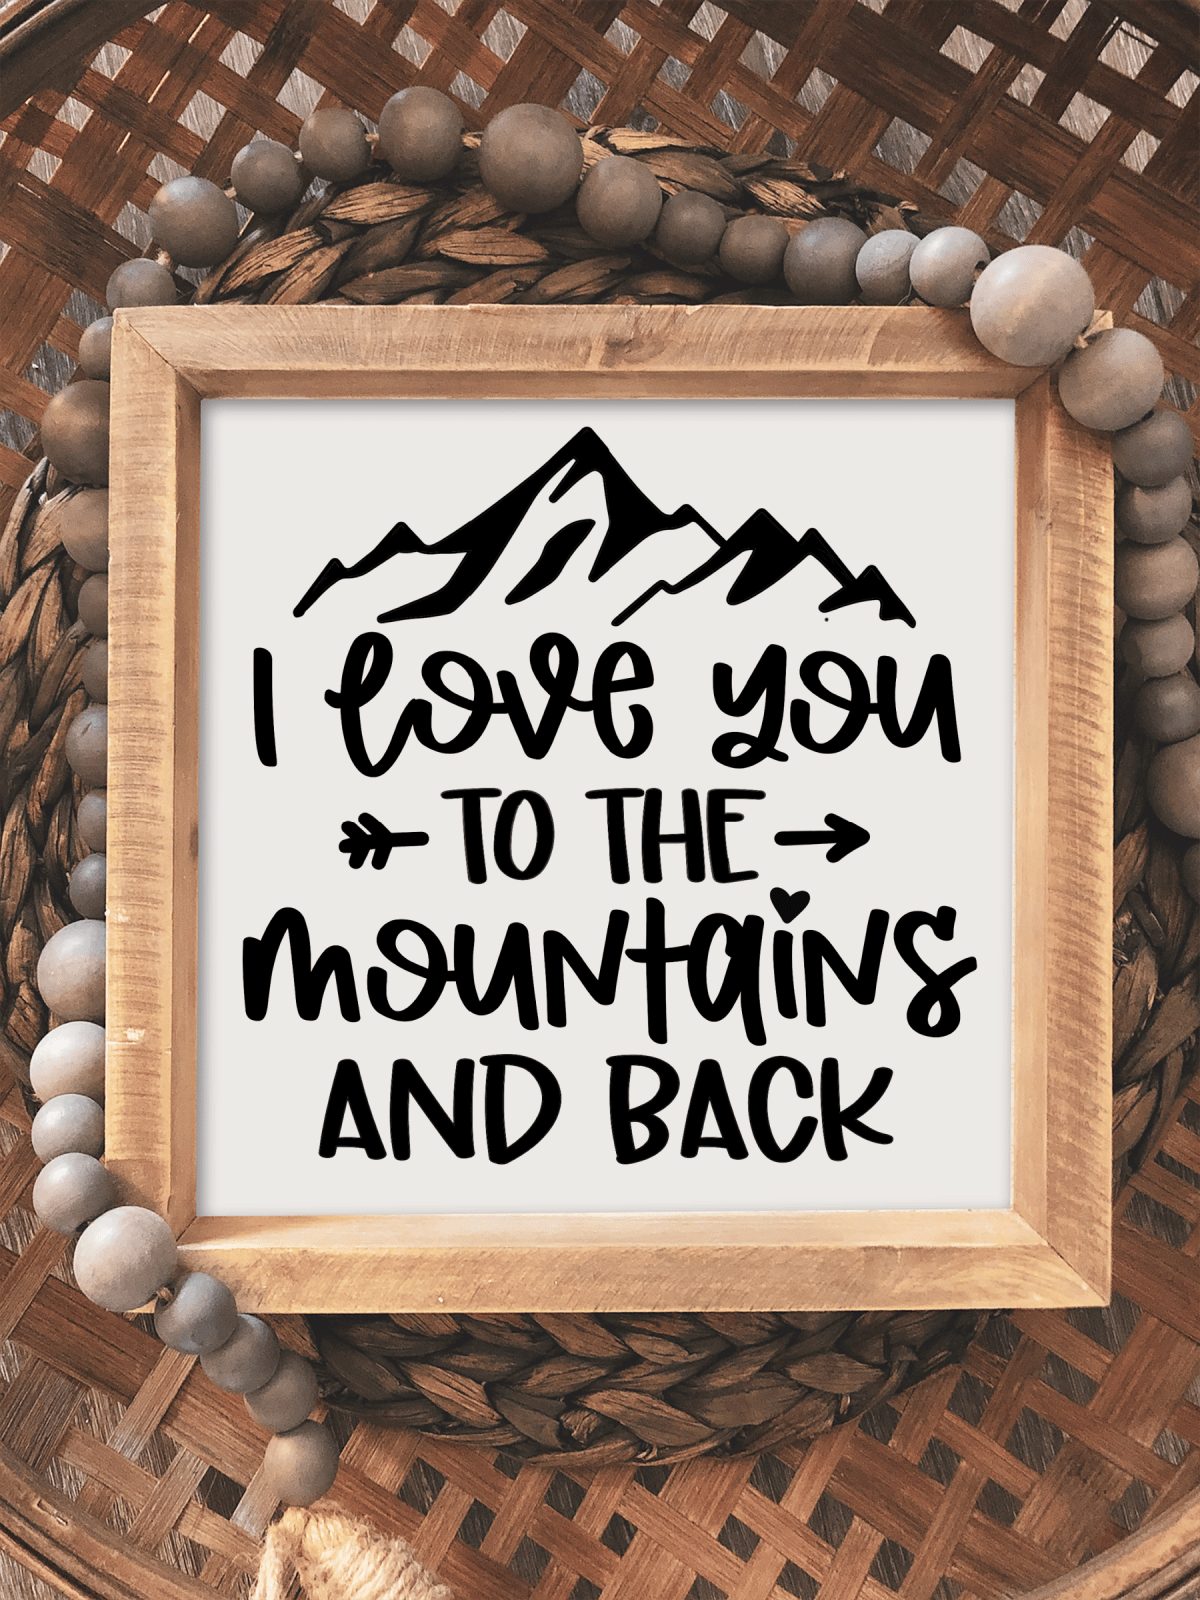 Love you to the mountains and back sign